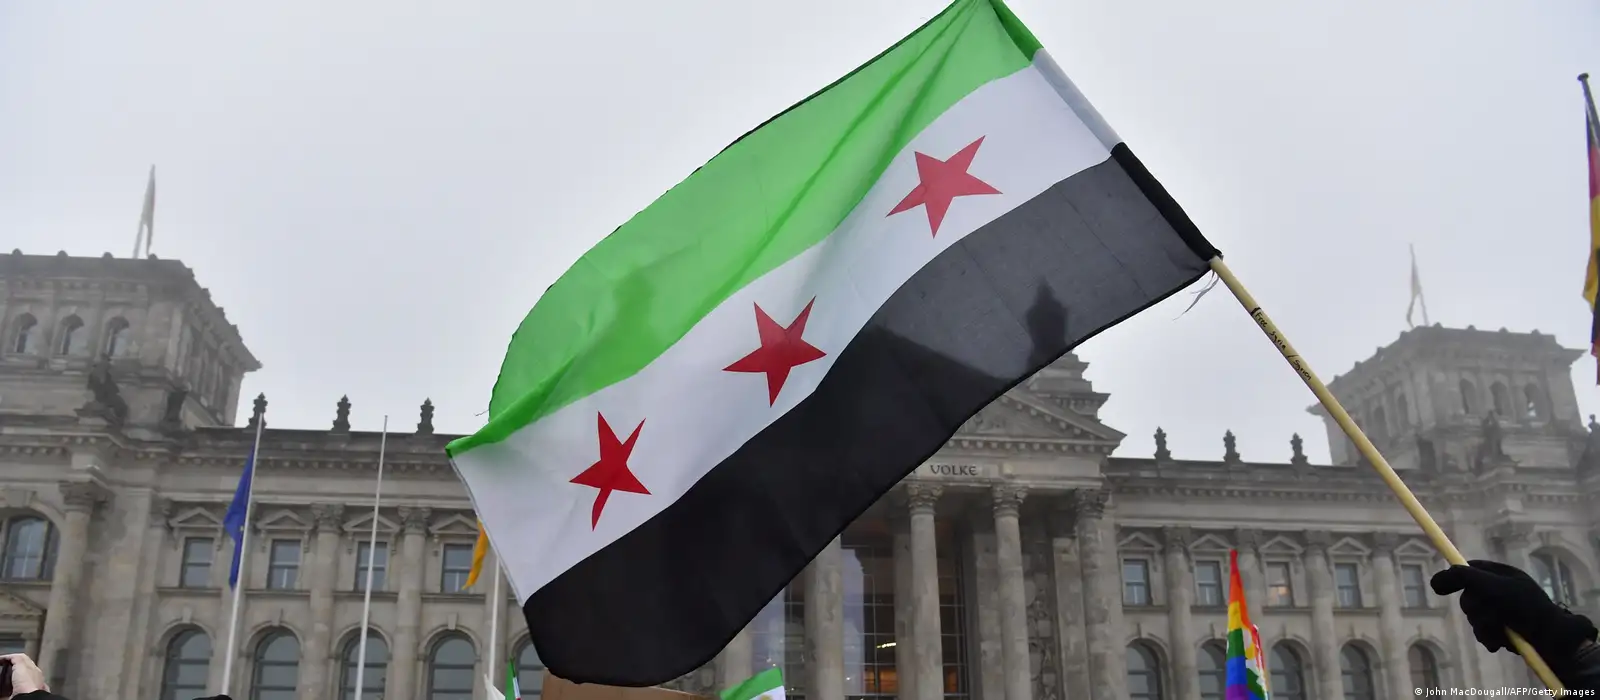 Flags of Syria: Symbols of a Divided Nation 